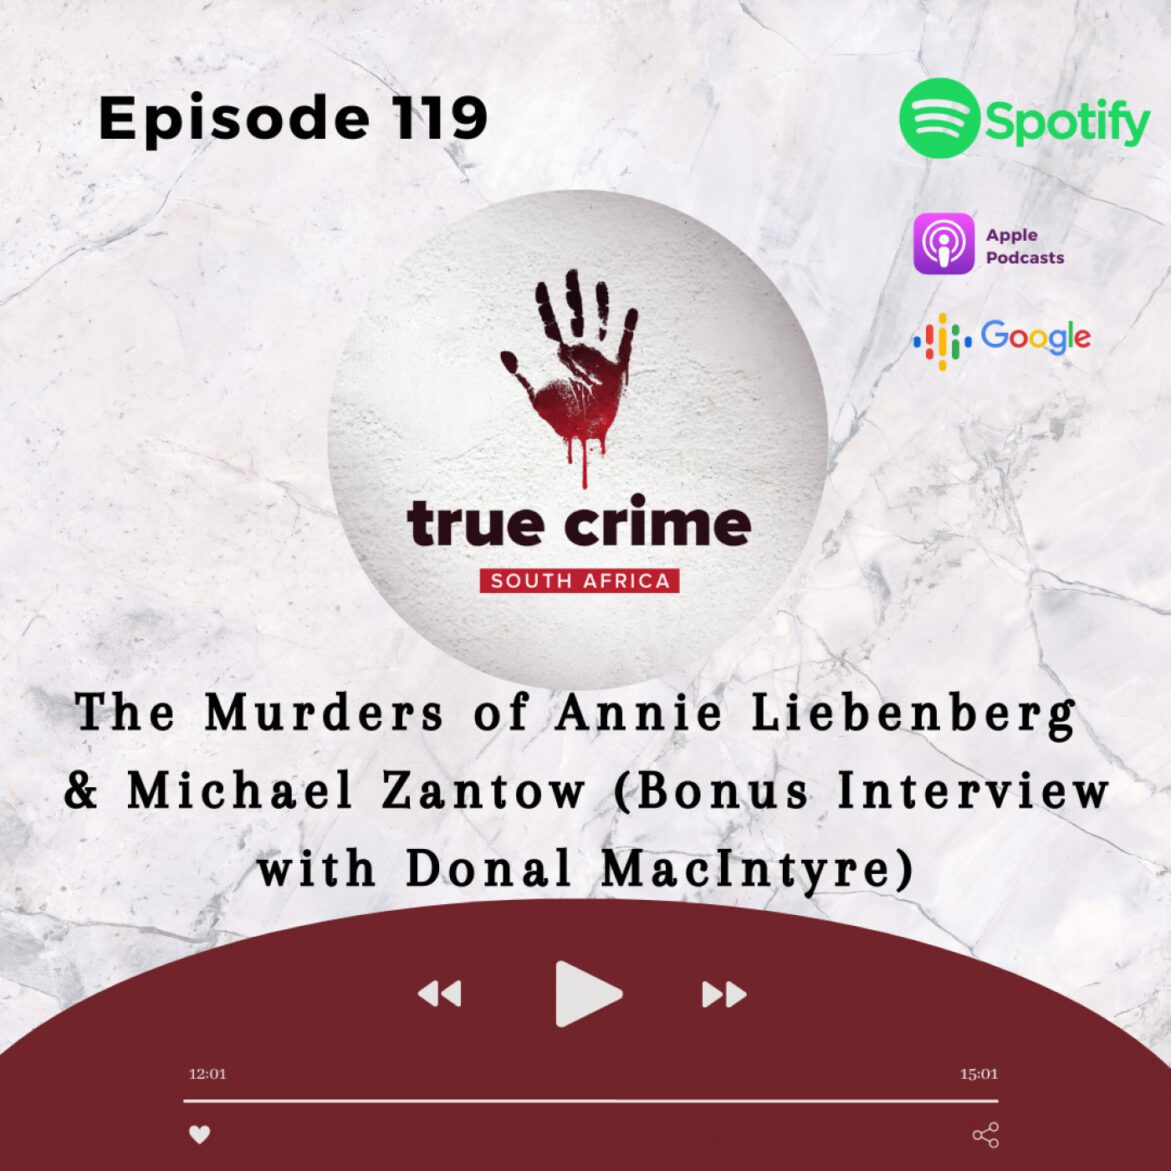 Black Podcasting - Episode 119 The Murders of Annie Liebenberg & Michael Zantow (Bonus Interview with Donal MacIntyre)